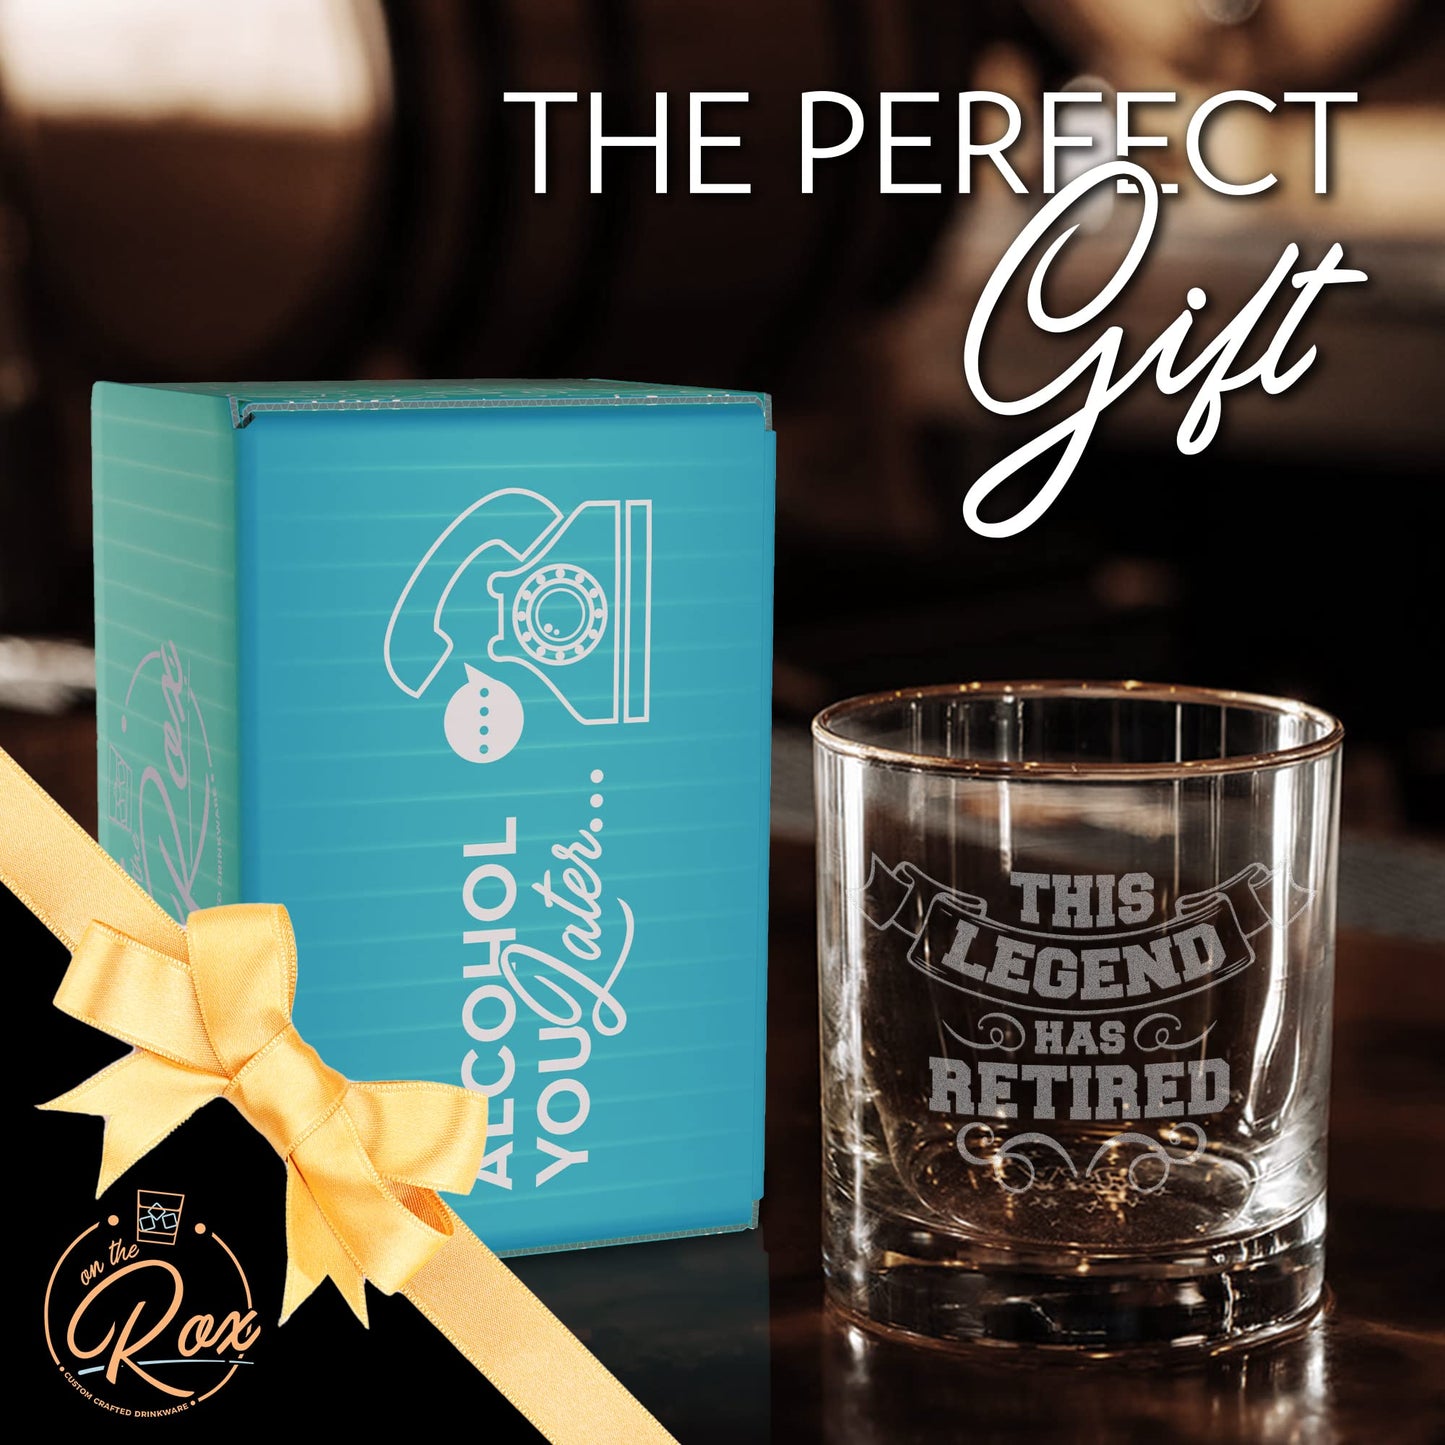 On The Rox Retirement Gifts For Men - Permanently Engraved 11 oz Glass - “This Legend Has Retired” Funny Retirement Gag Gift Idea- Wish A Happy Retirement for a Coworker/Boss/Friend